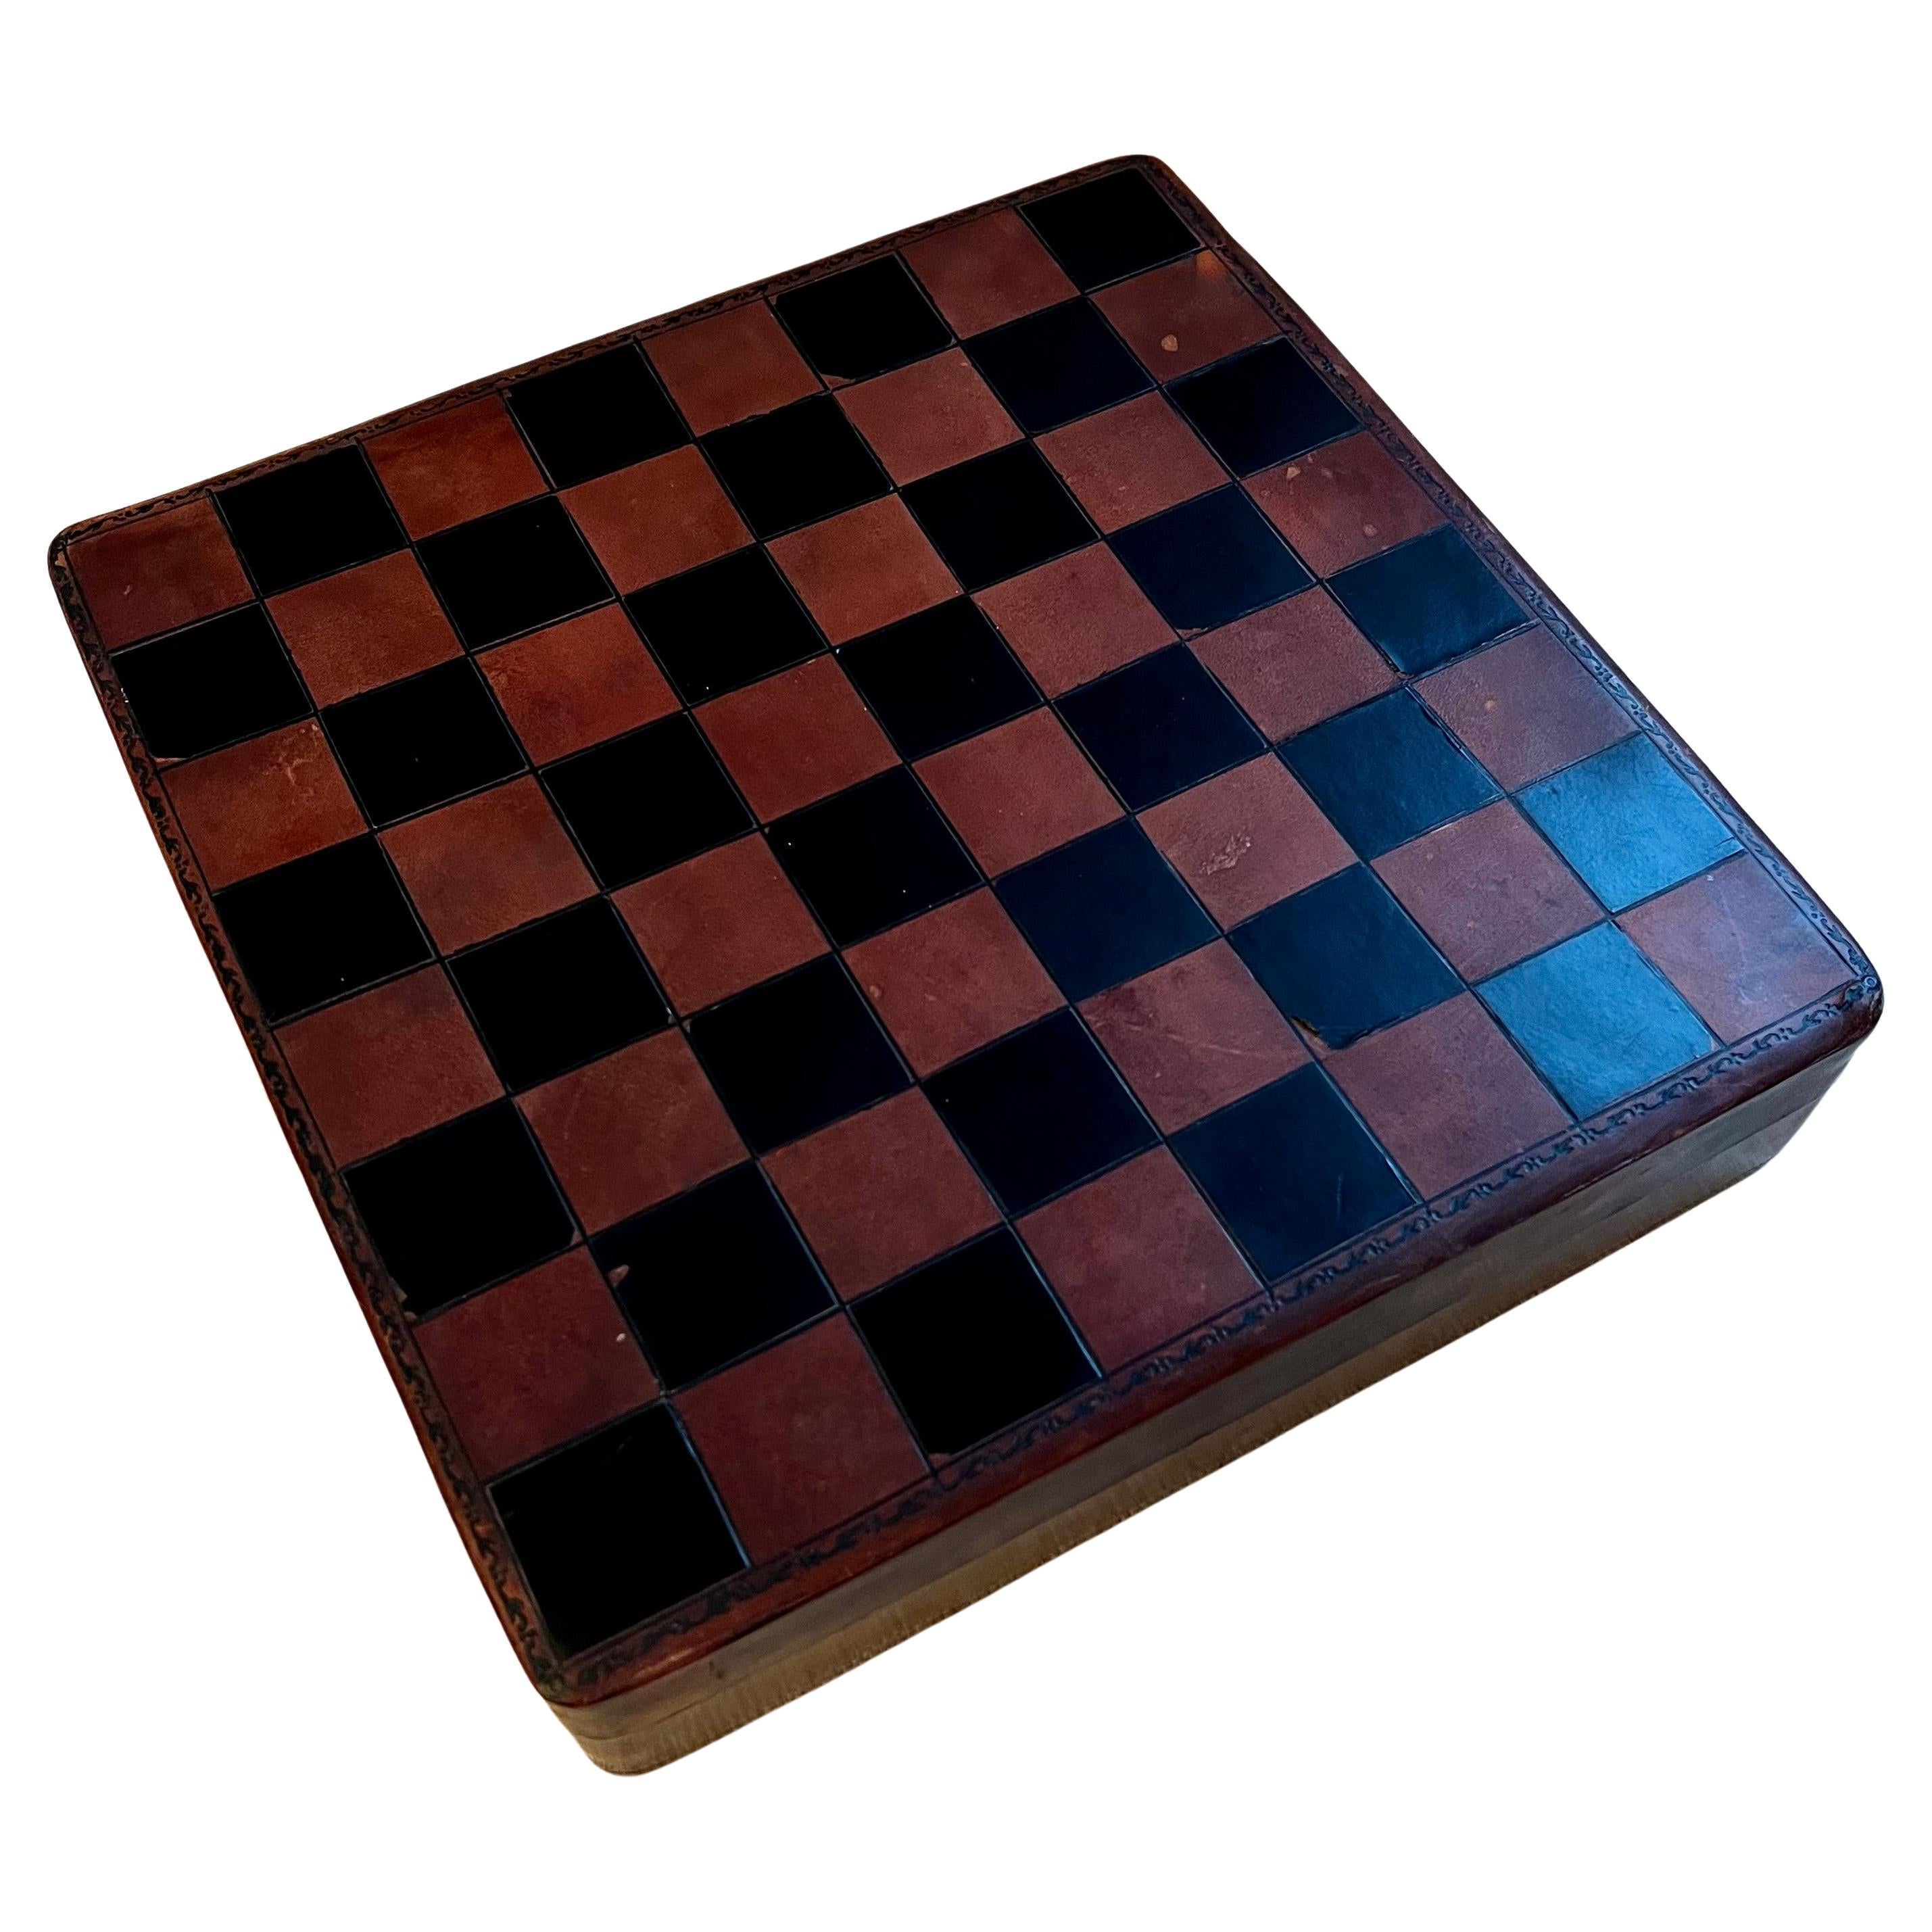 Custom Leather checker or chess box with velvet lined compartments for storage of game pieces... We have purchased and included wooden chess and checker playing pieces for the box - perfectly sized and nice to the touch.

A great travel companion,